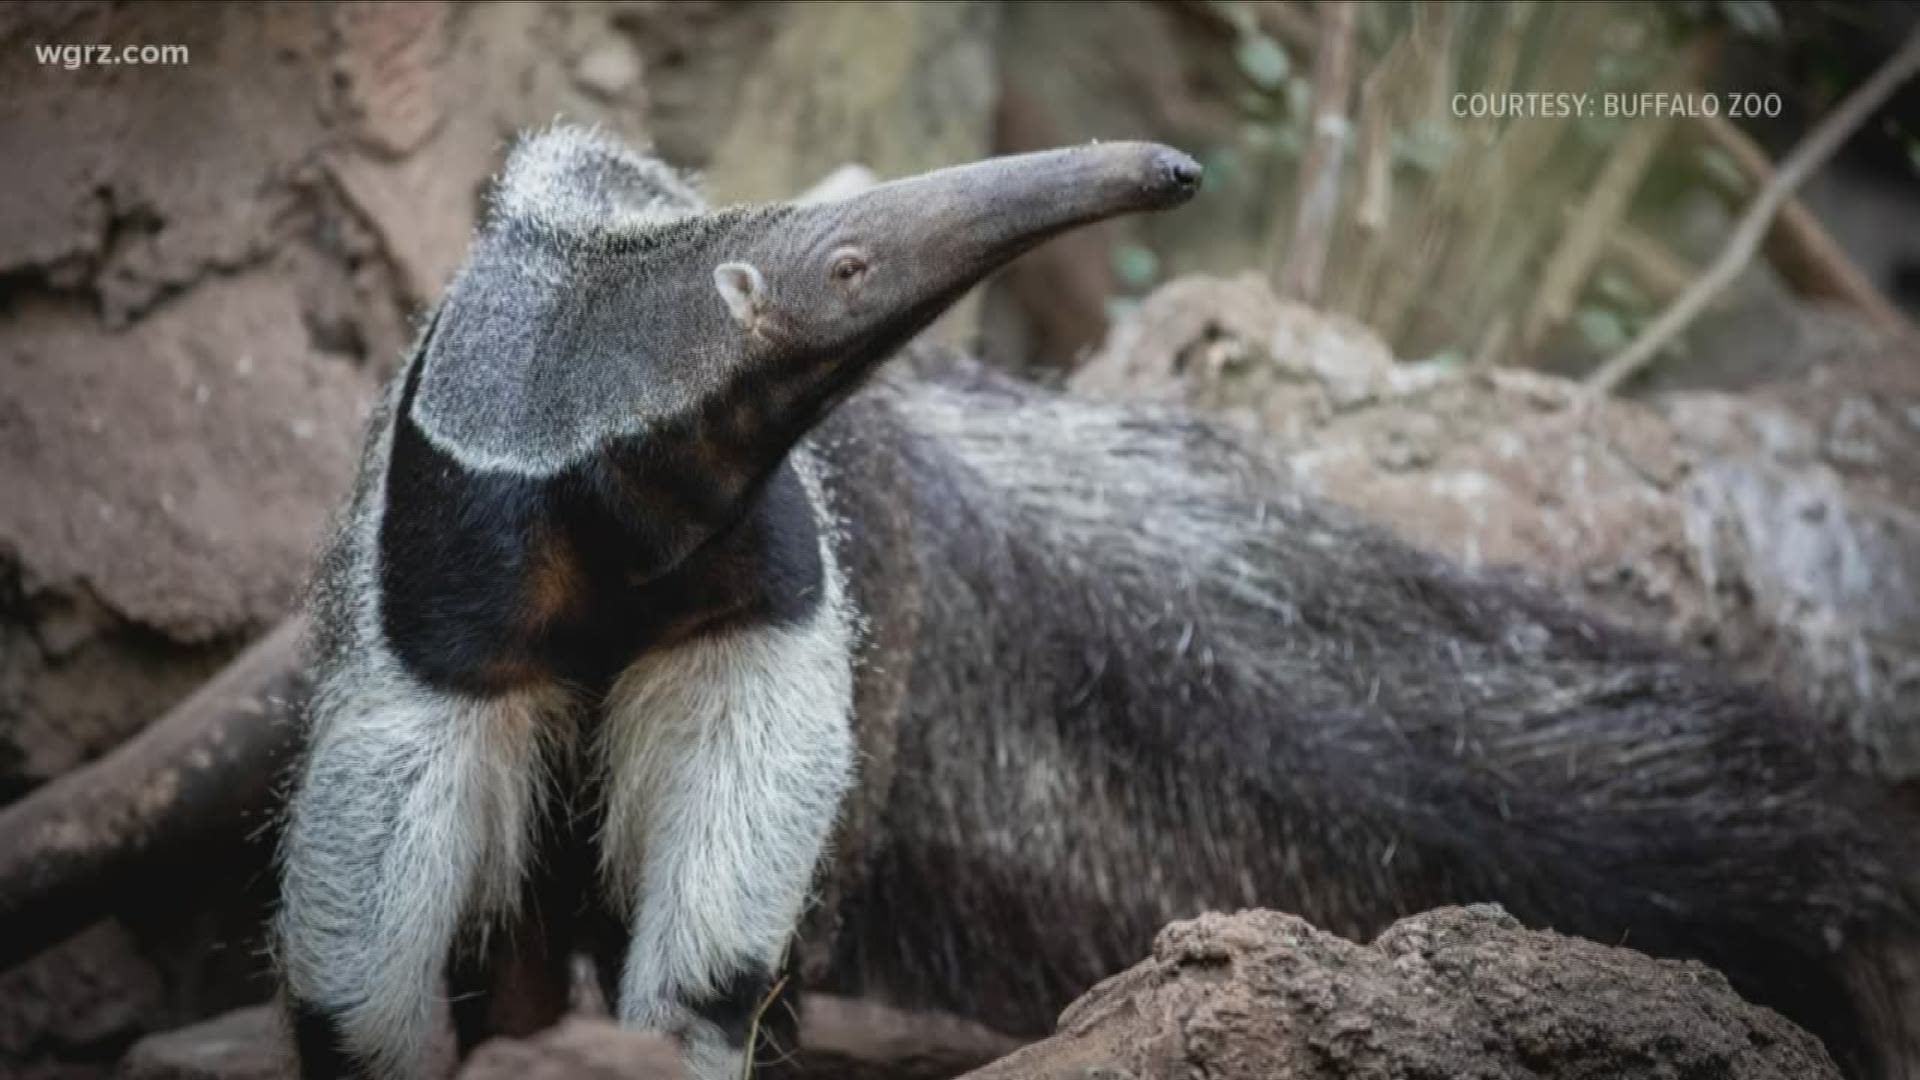 New giant anteater at the Buffalo Zoo